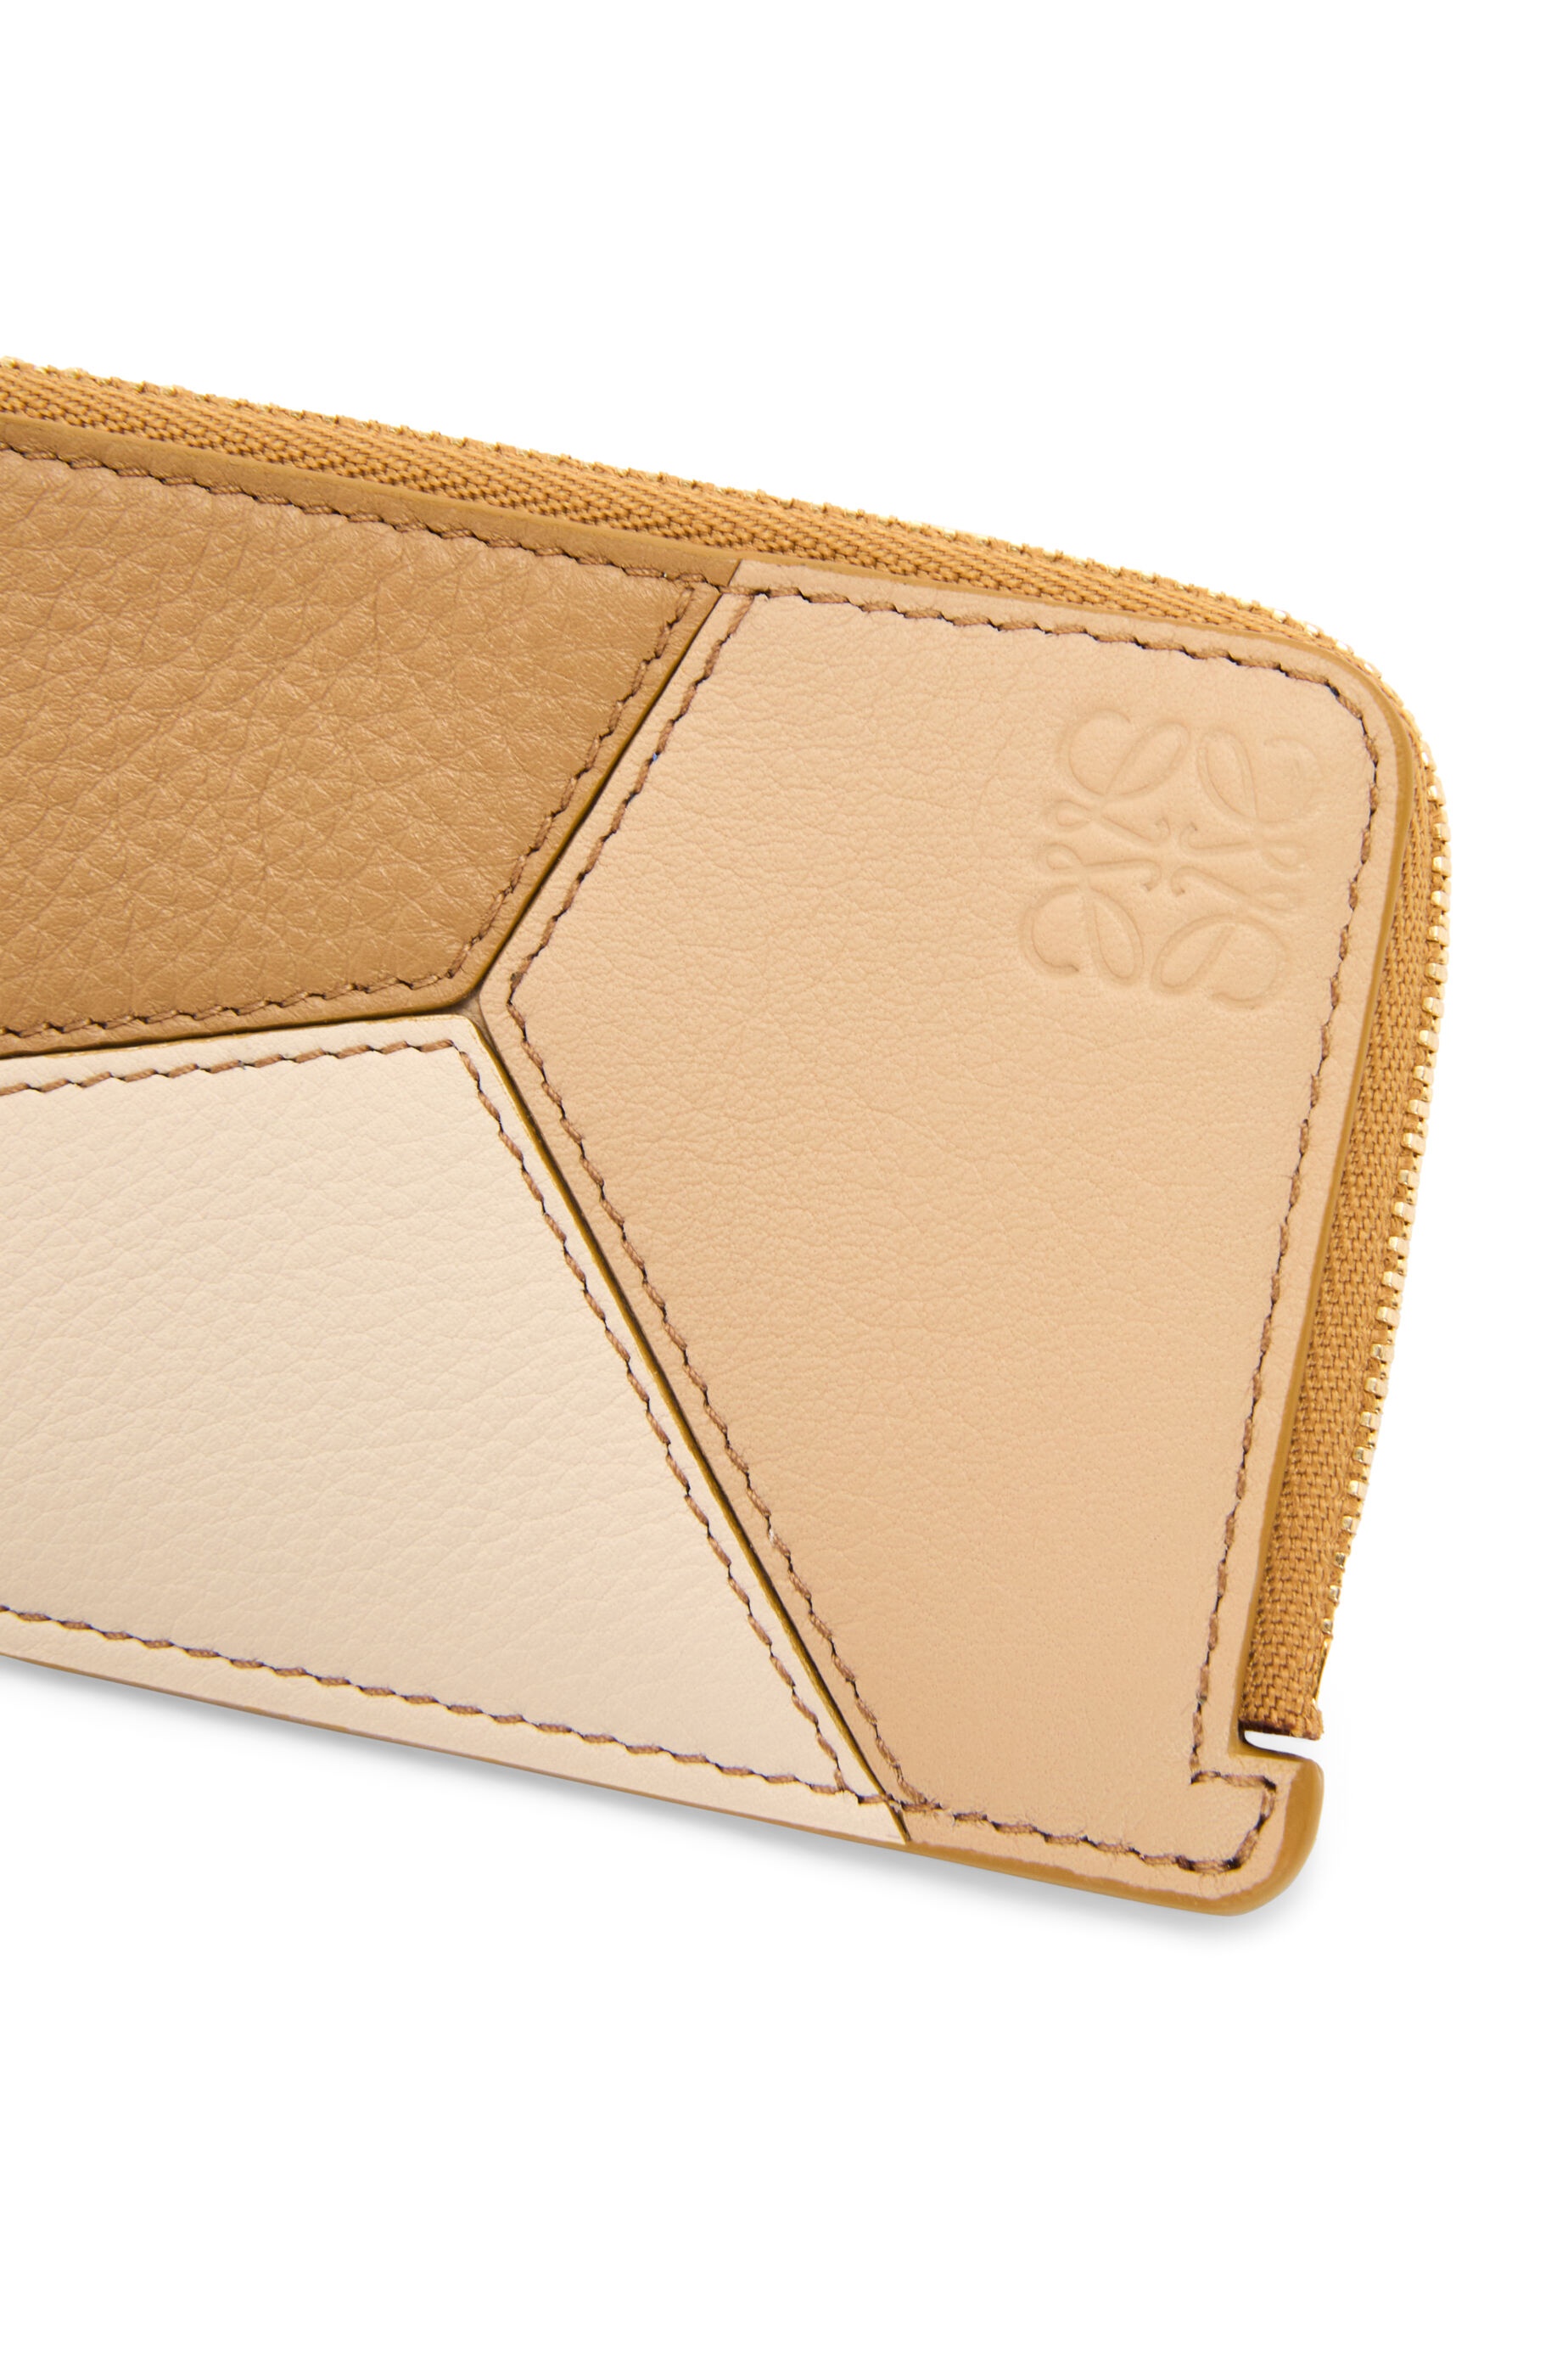 Puzzle coin cardholder in classic calfskin - 4